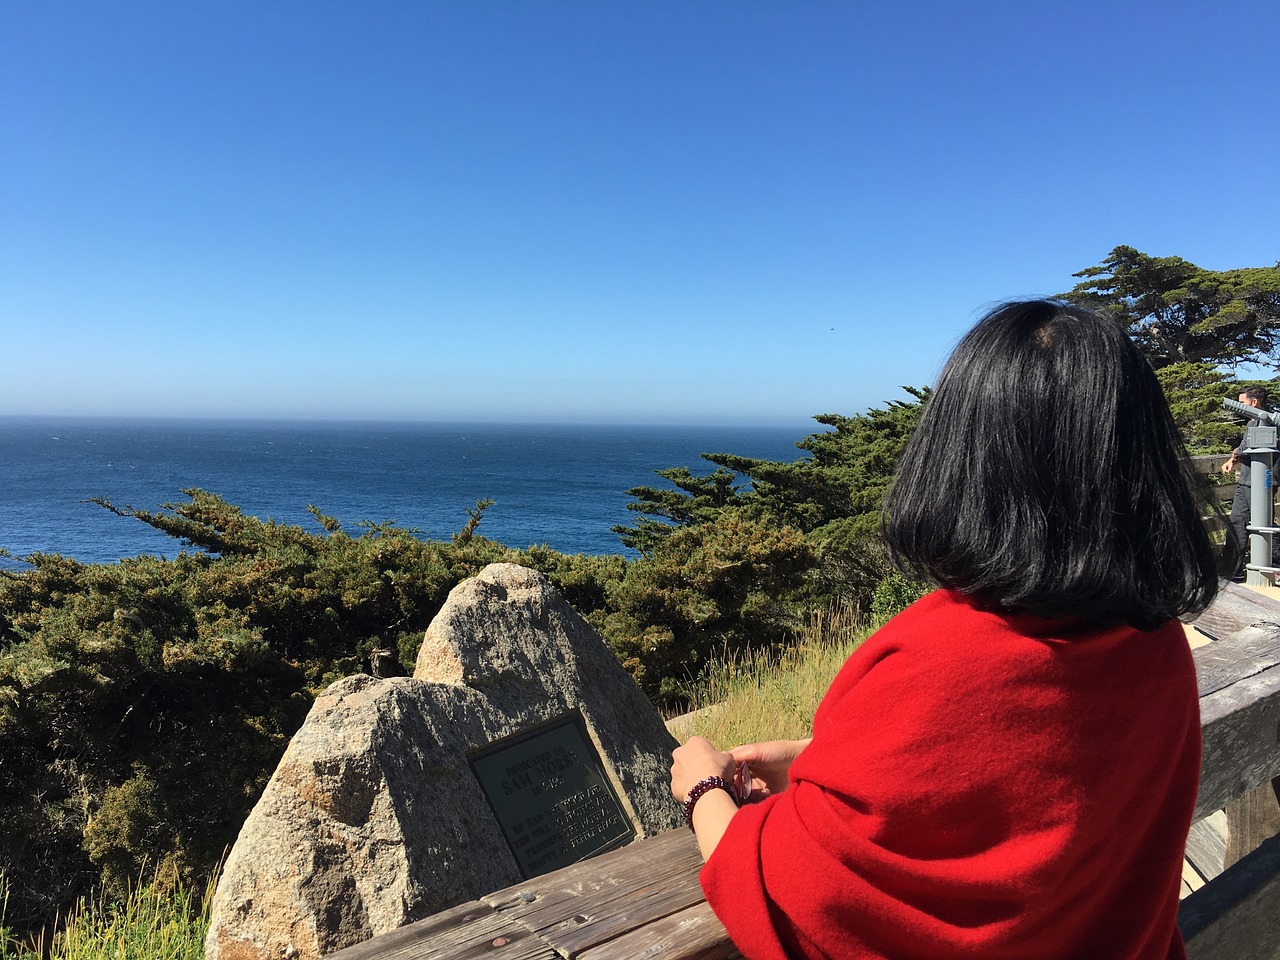 Taking a Break from driving the Pacific Coast Highway in Big Sur